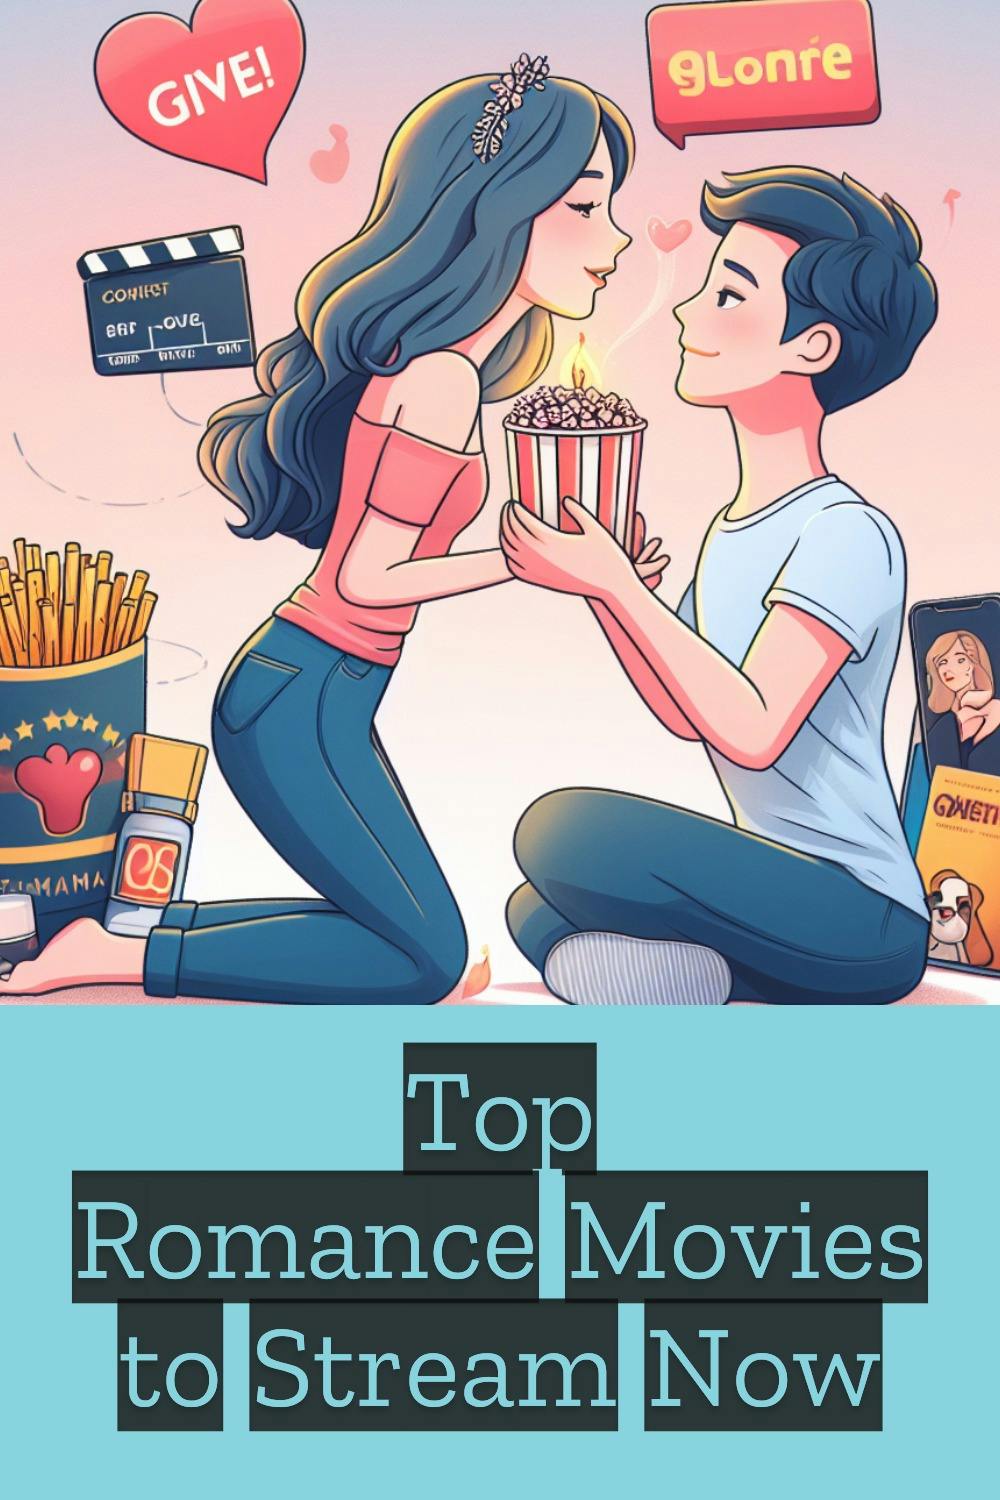 Top romance movies to watch on Amazon, Google Play or iTunes